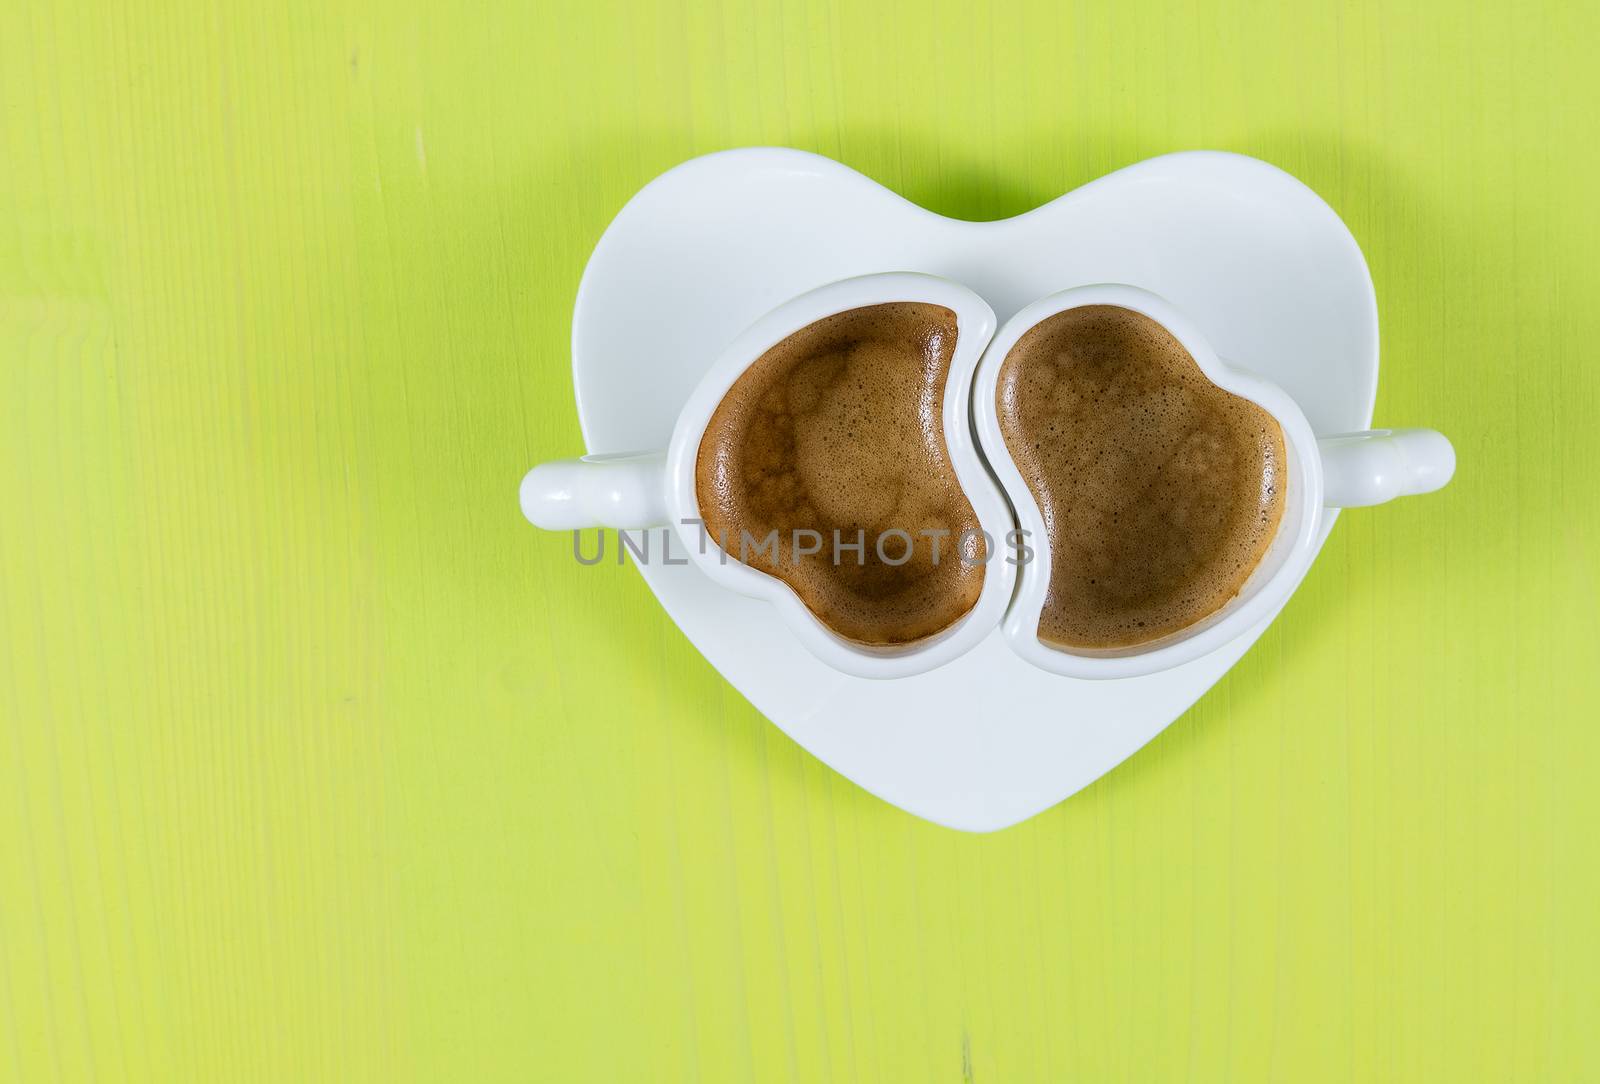 Flat lay with two cups of espresso coffee on a green wooden board. Concept for romance